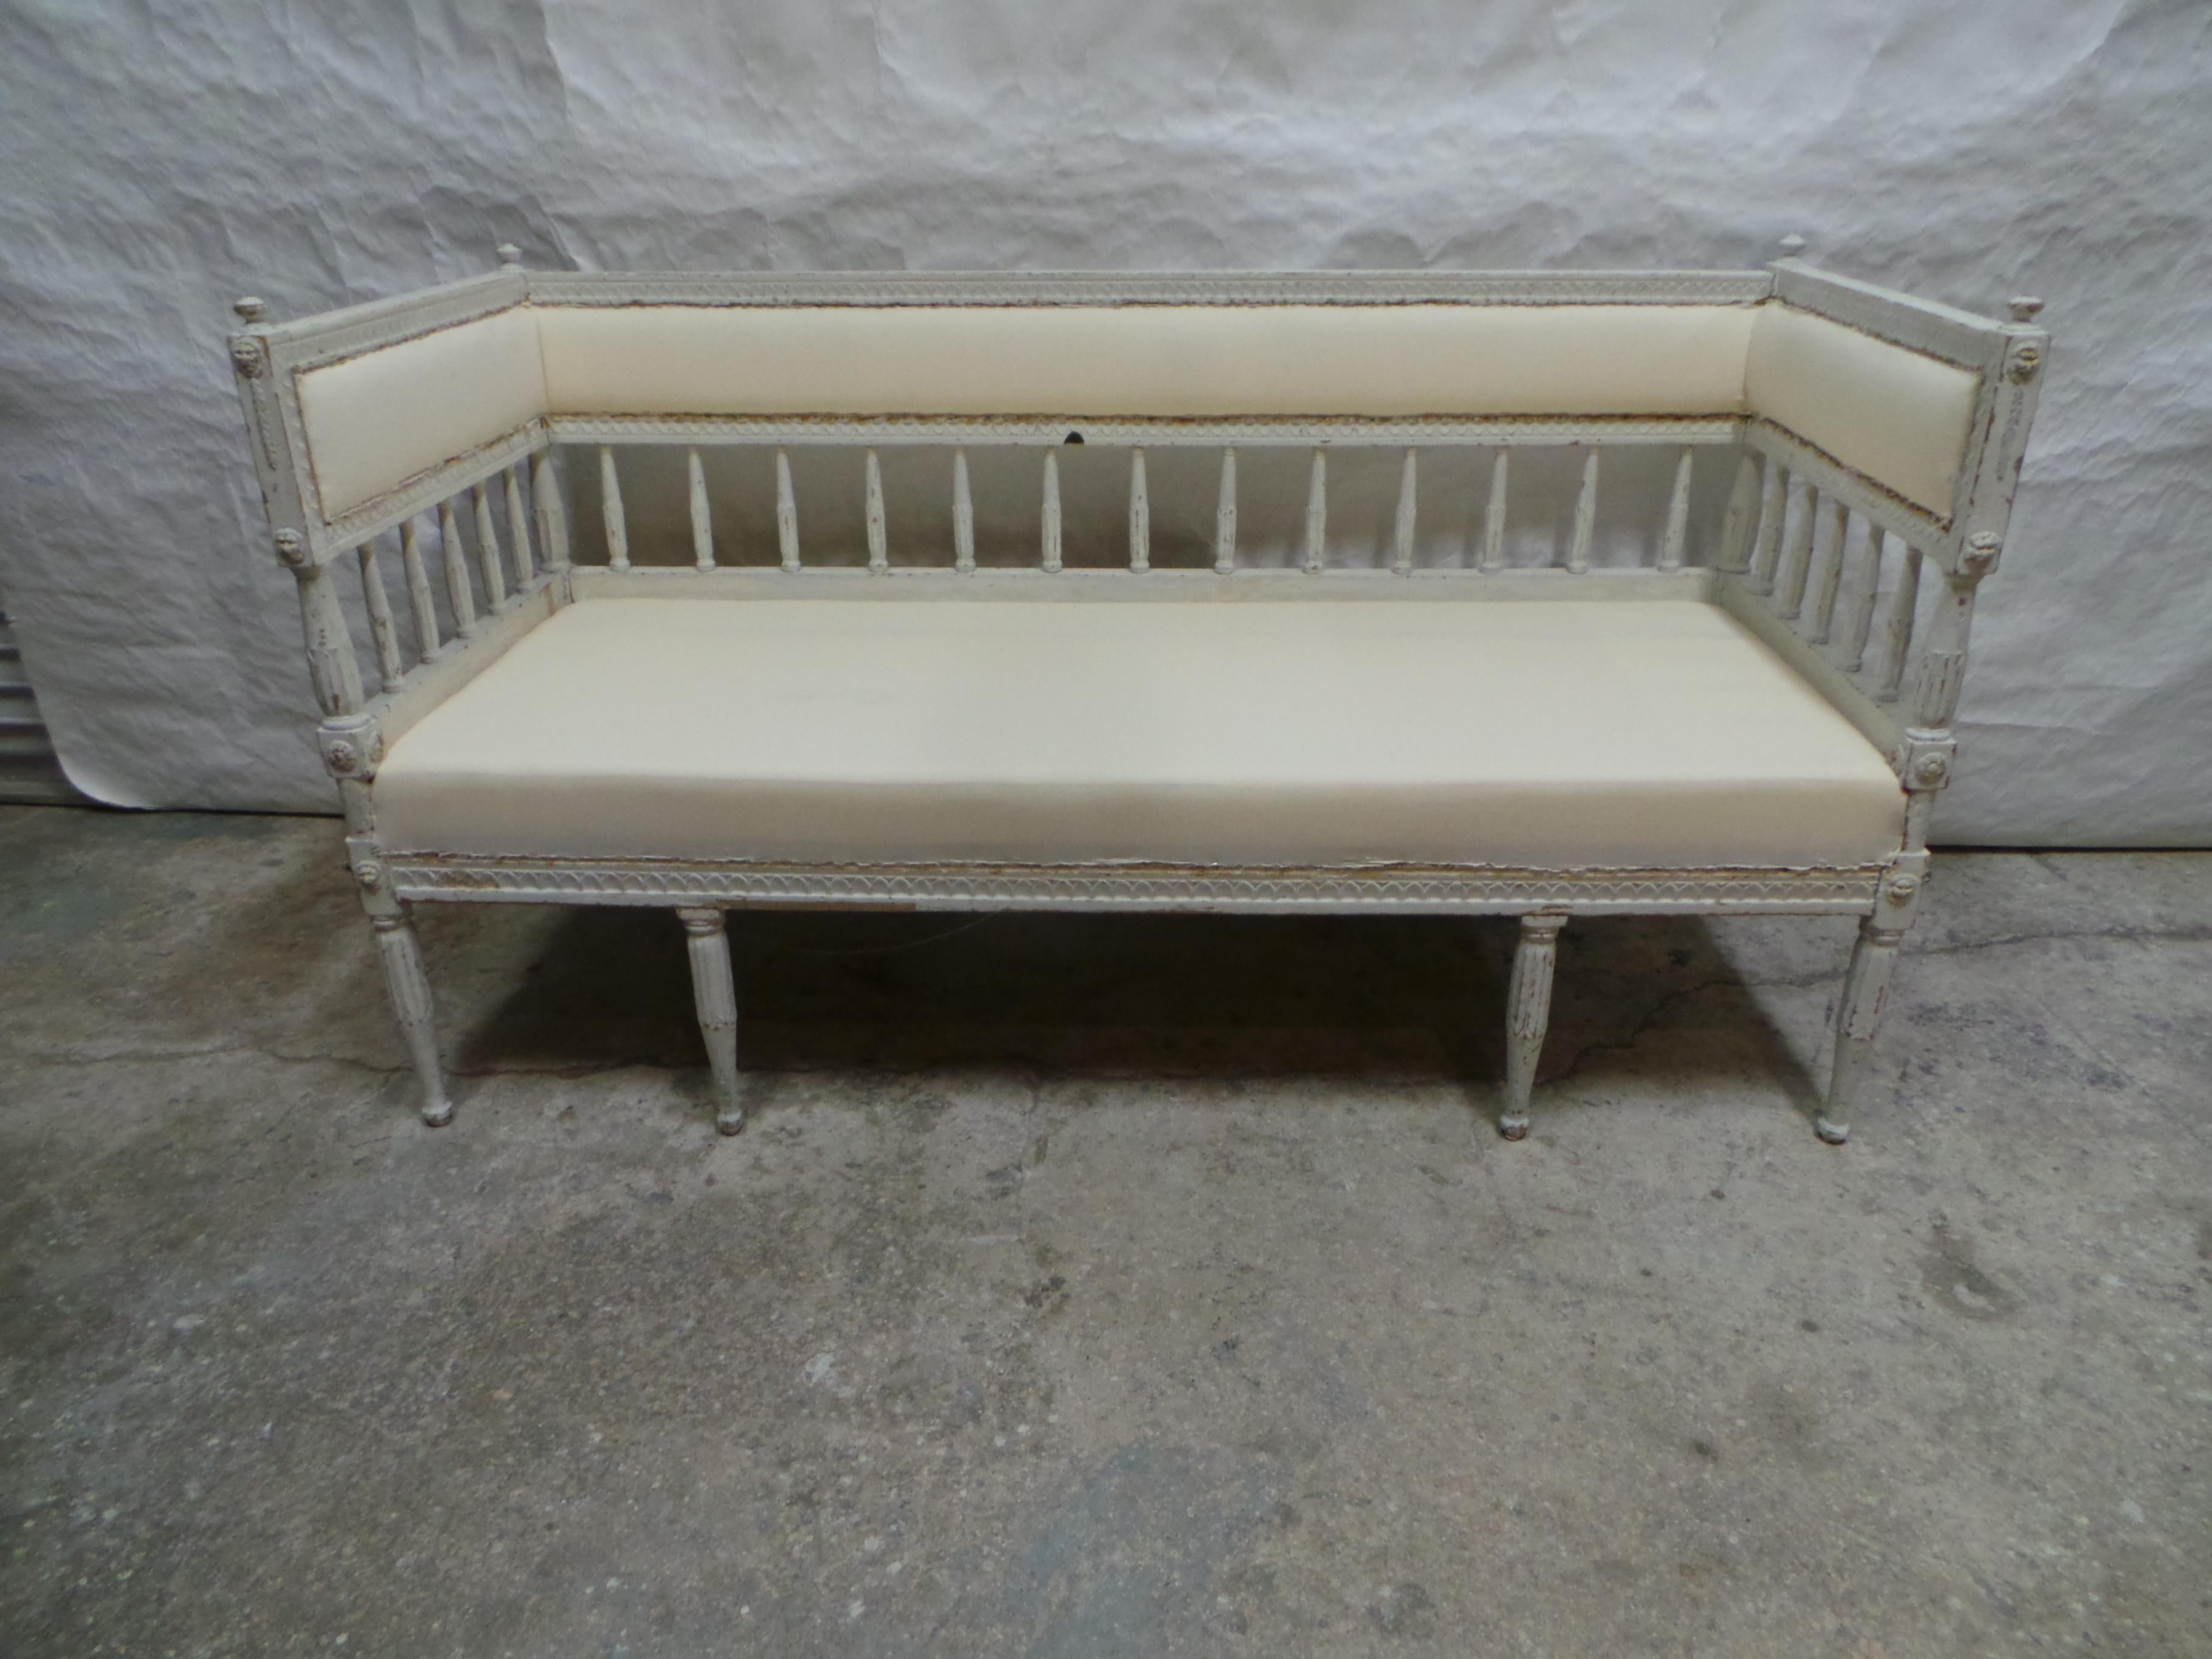 This is a Original Painted Swedish Gustavian Sofa. the seating has been restored and covered in Muslin.